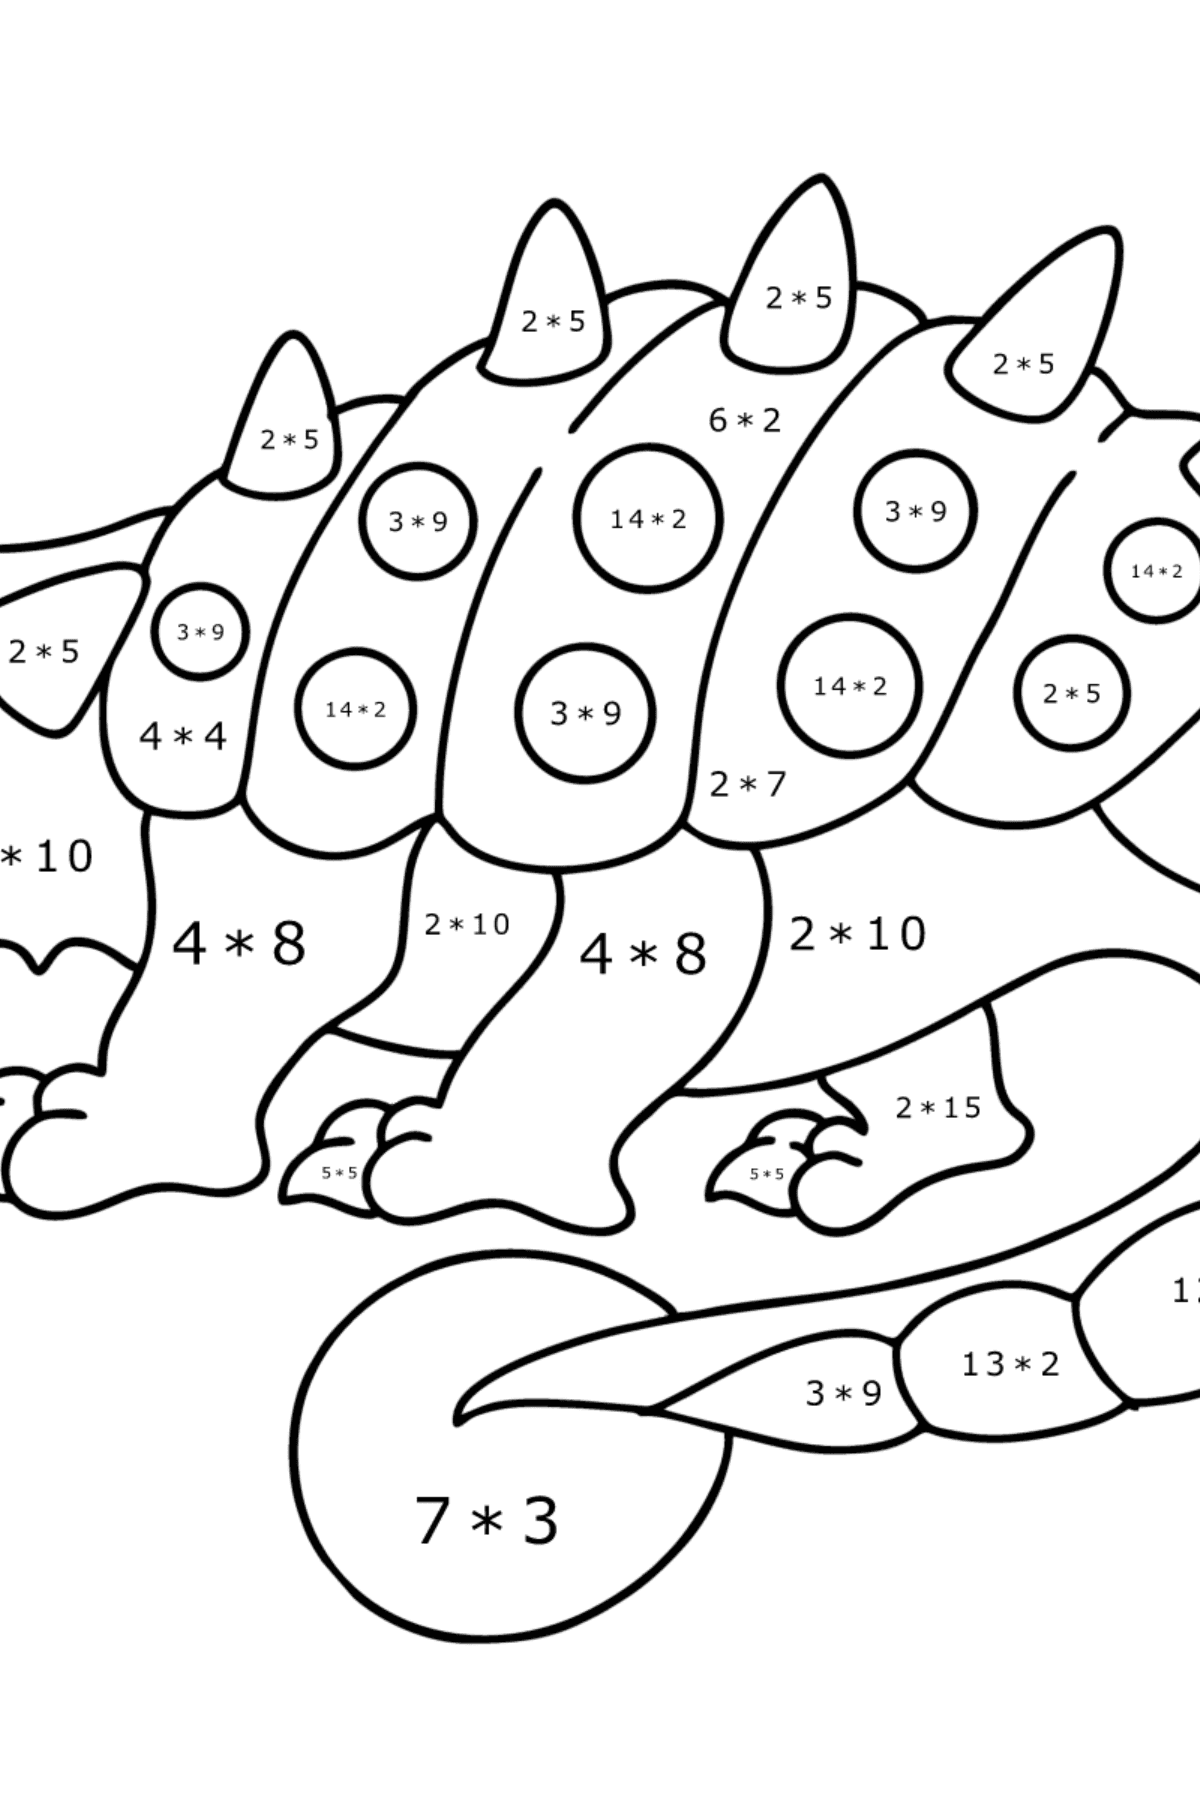 Ankylosaurus coloring page - Math Coloring - Multiplication for Kids